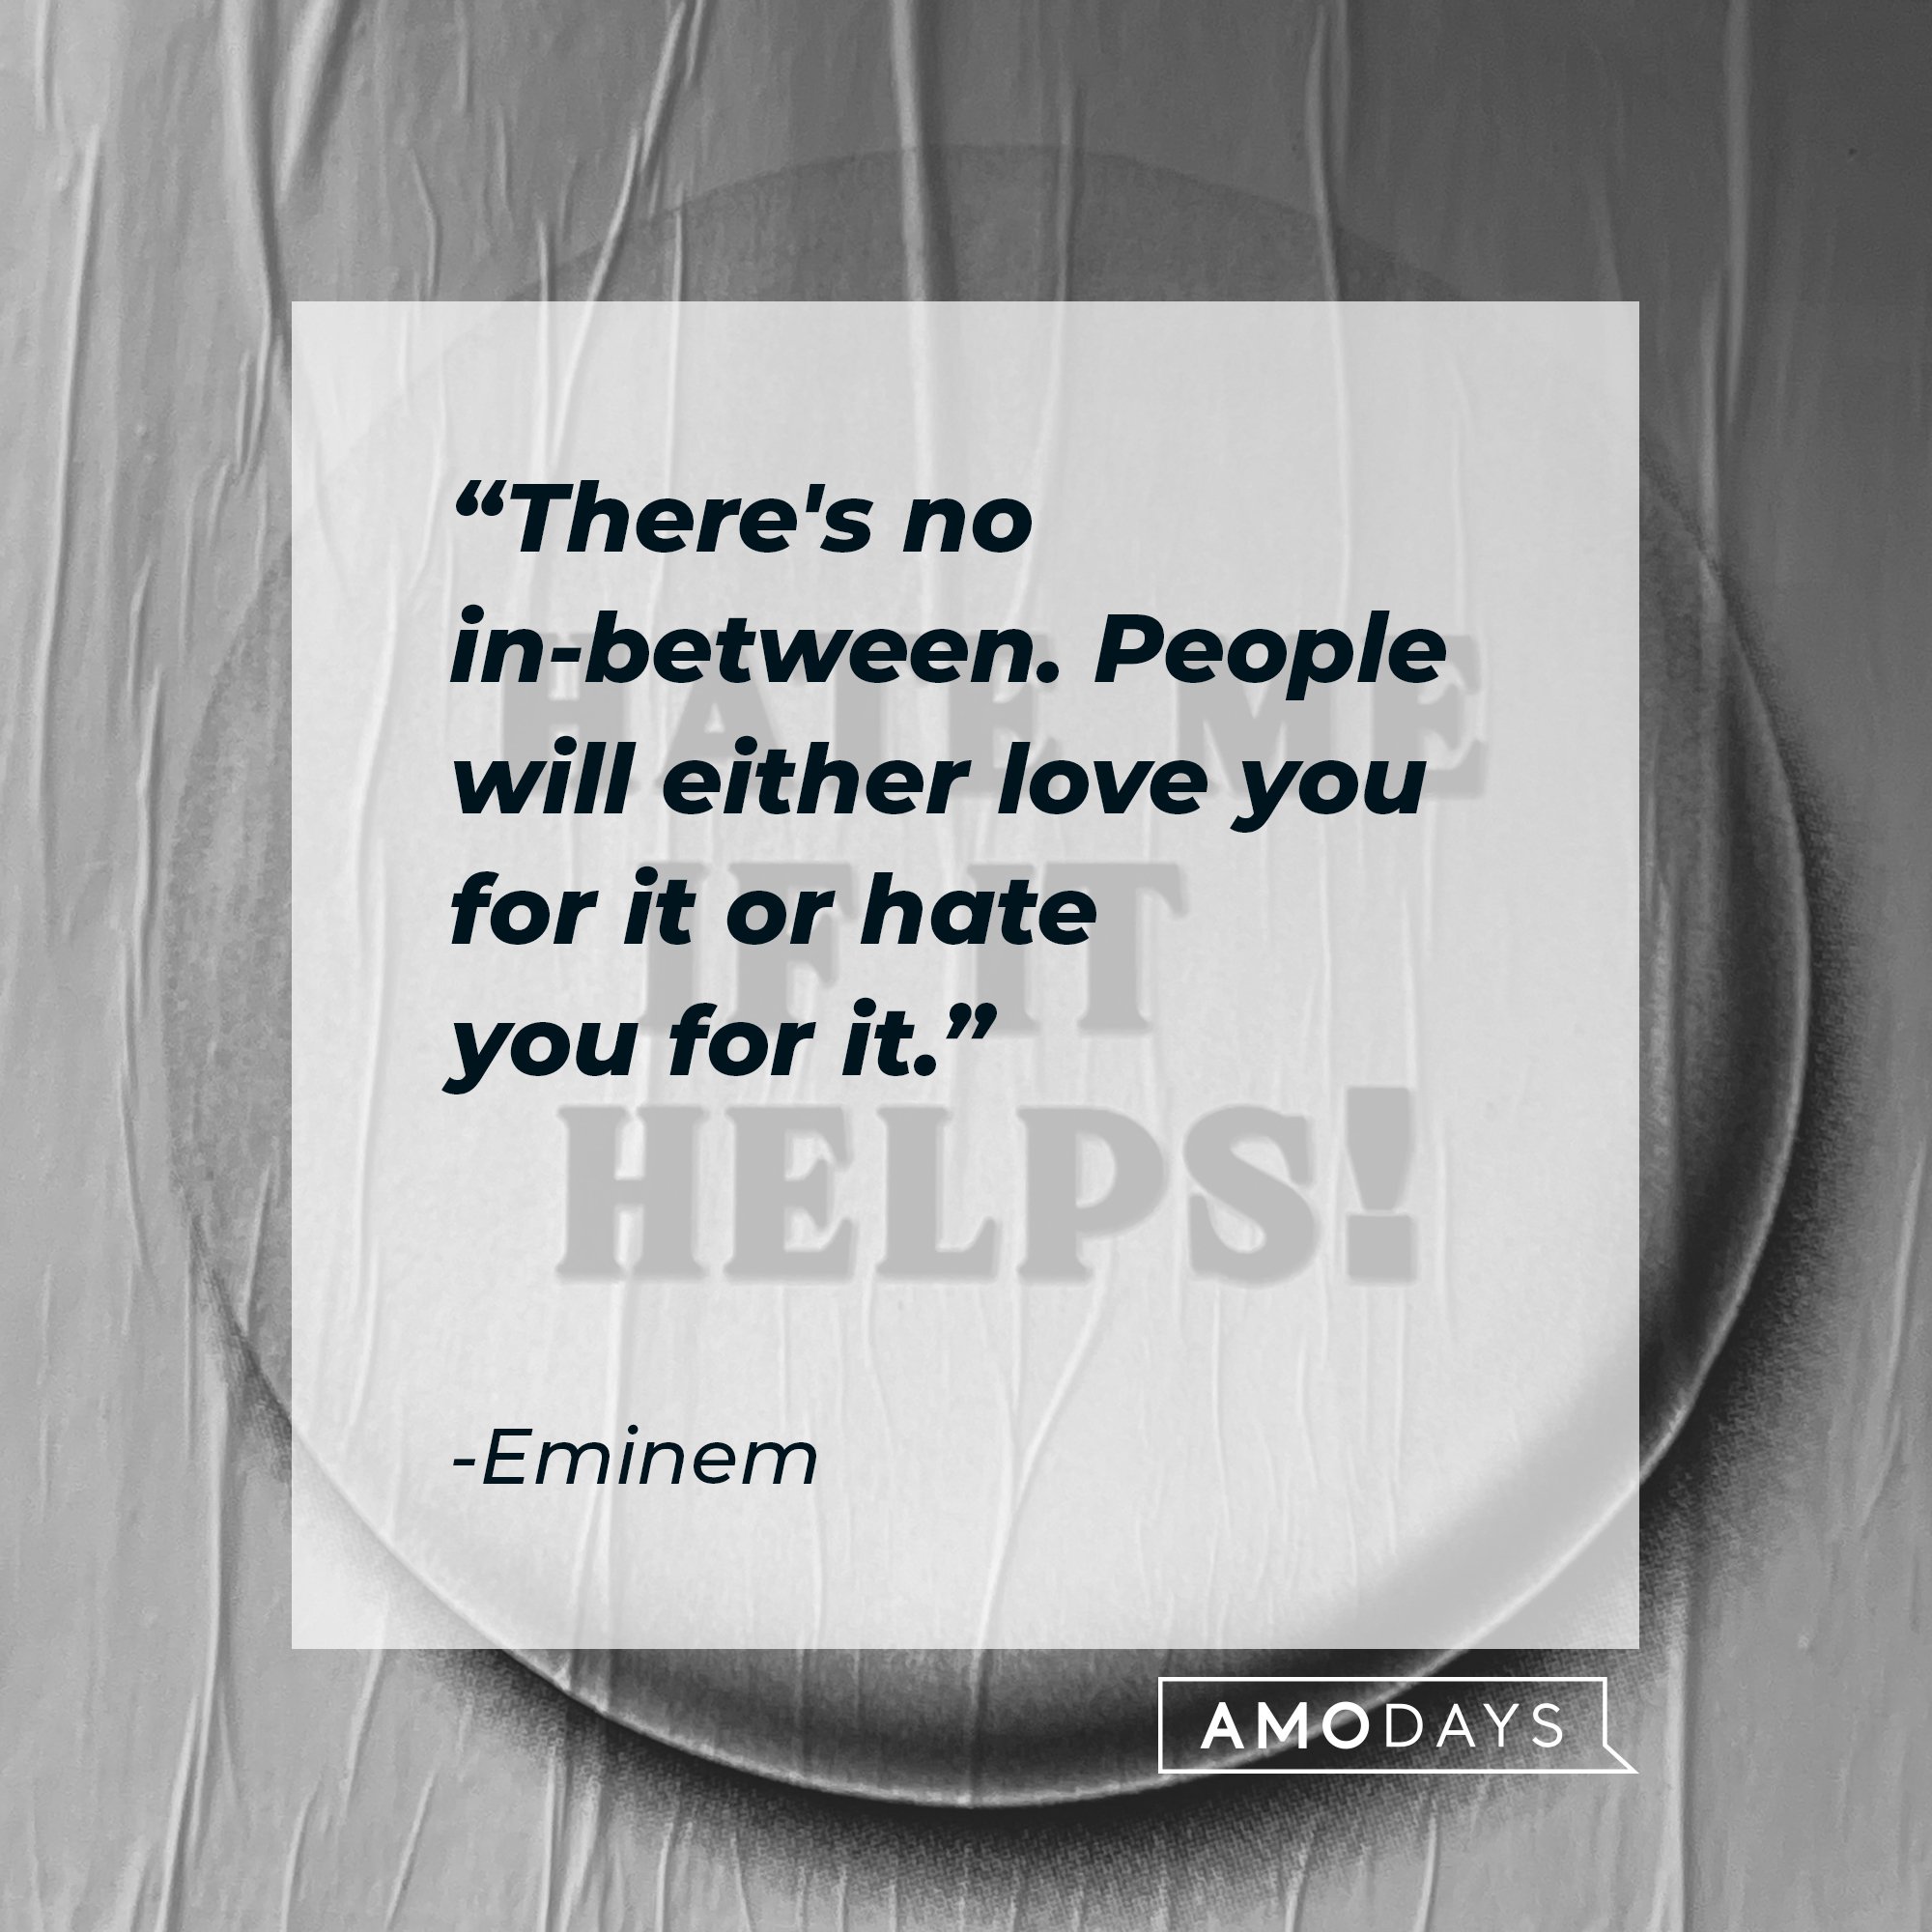 Eminem’s quote: "There's no in-between. People will either love you for it or hate you for it." | Image: AmoDays 